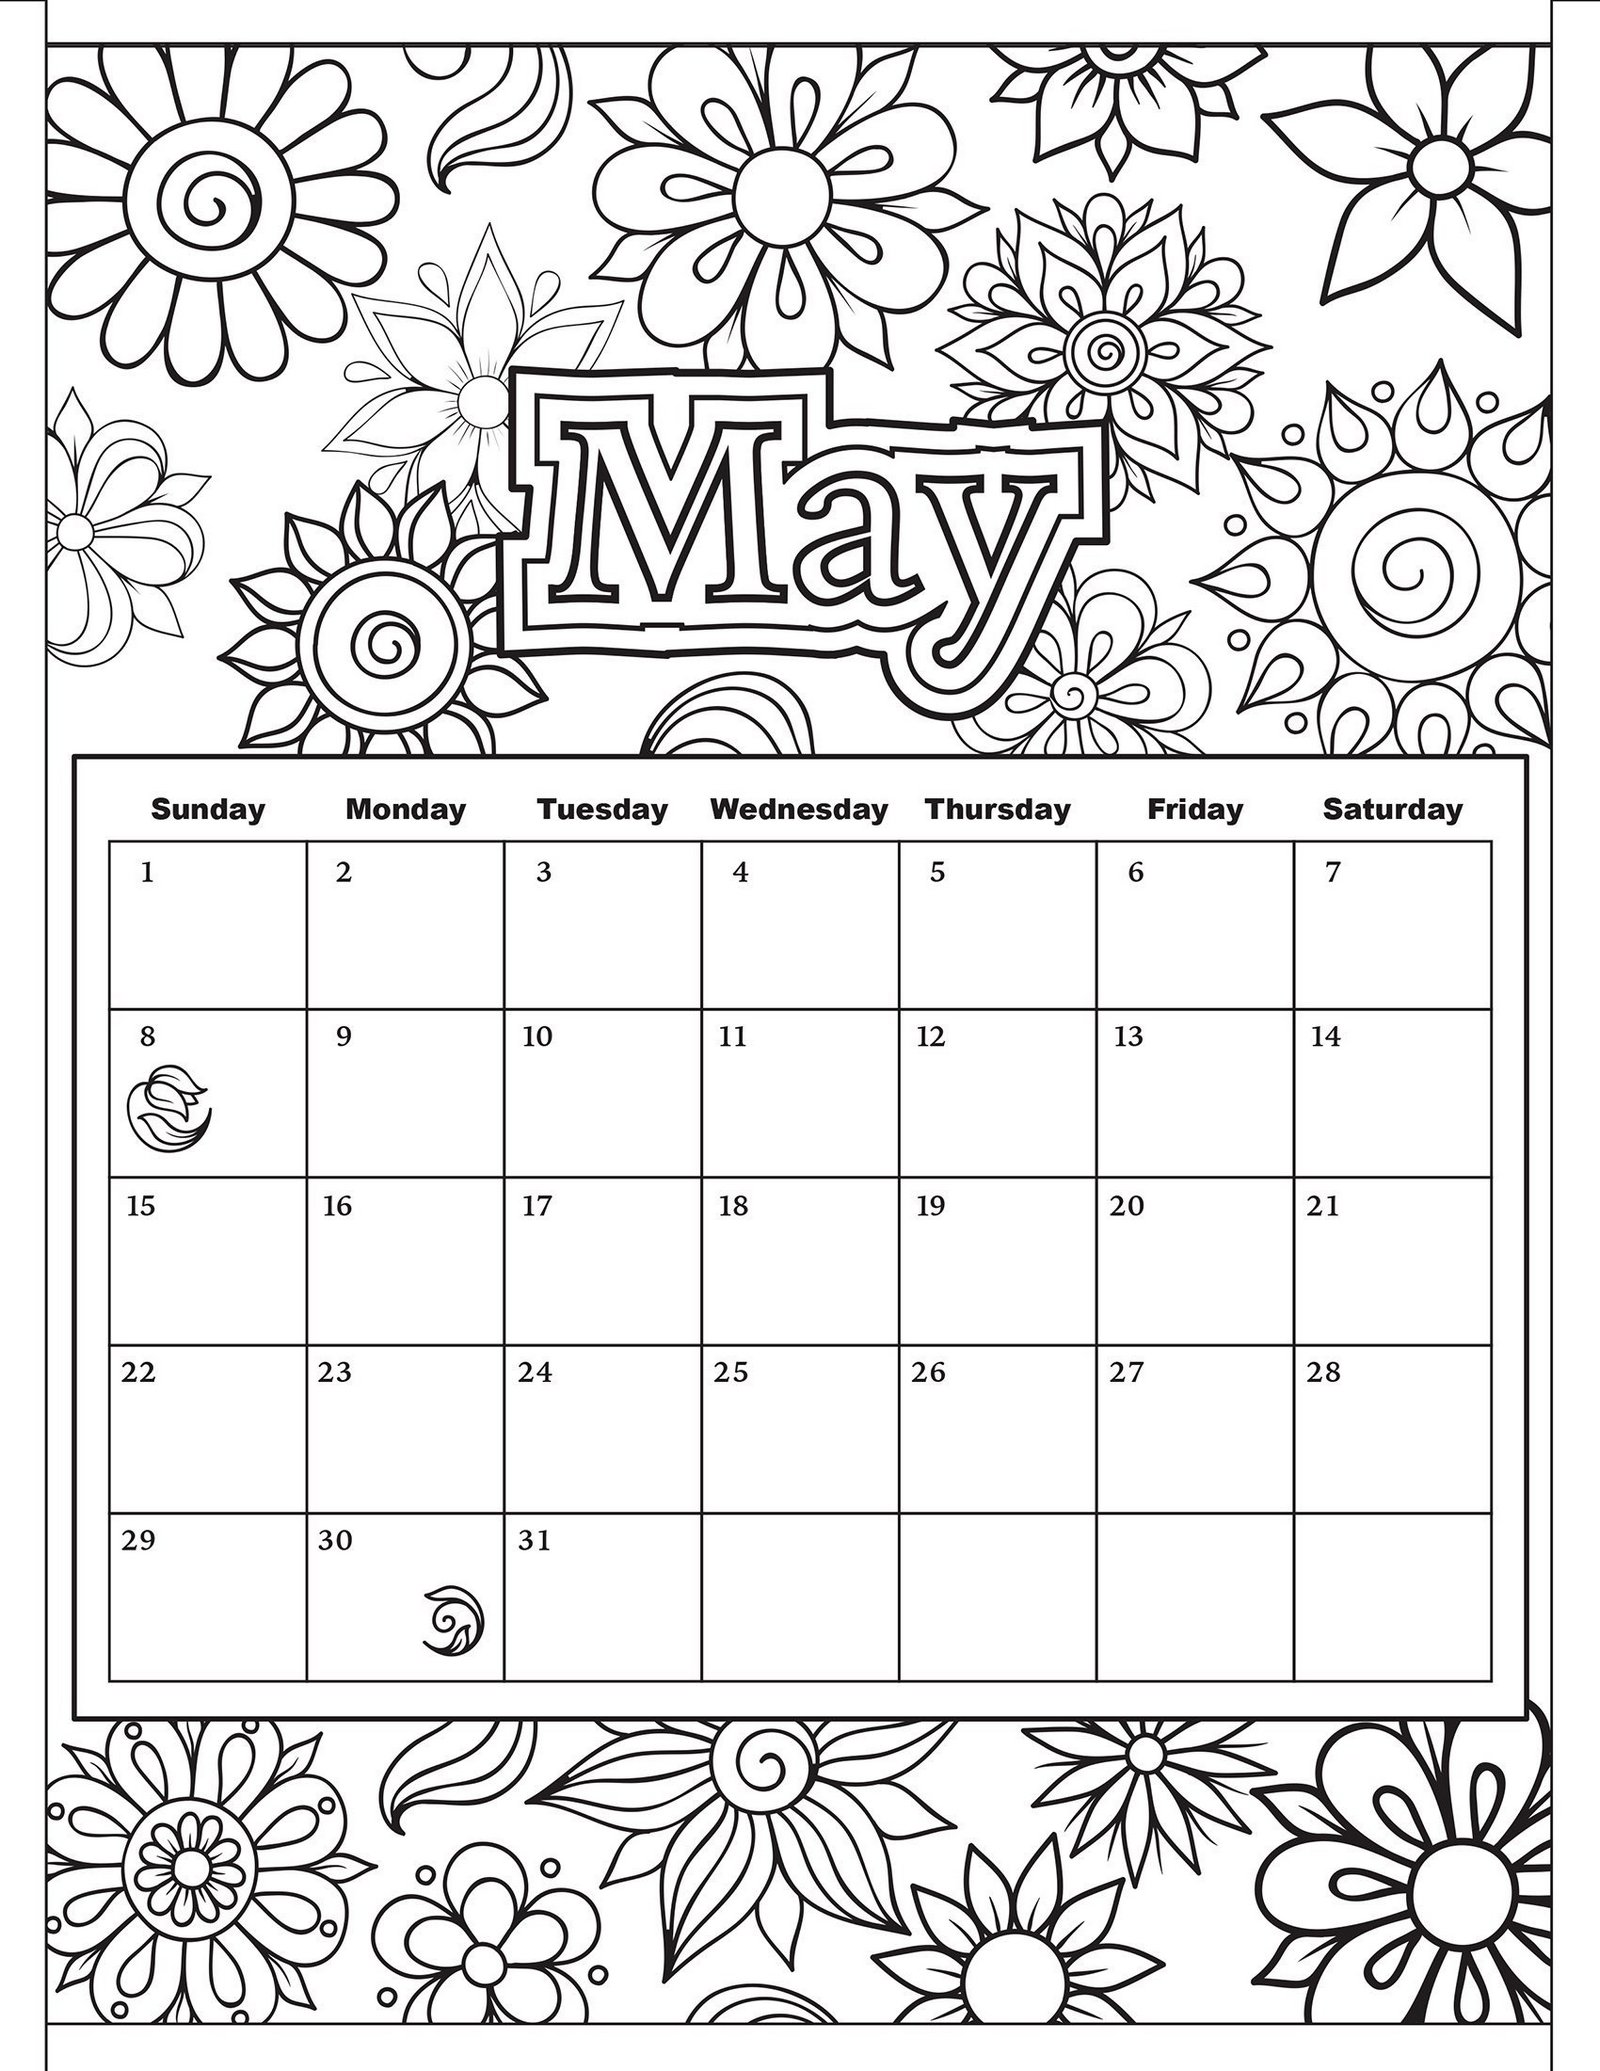 Calendar Coloring Pages For Kids To Become Familiar With The Days And 